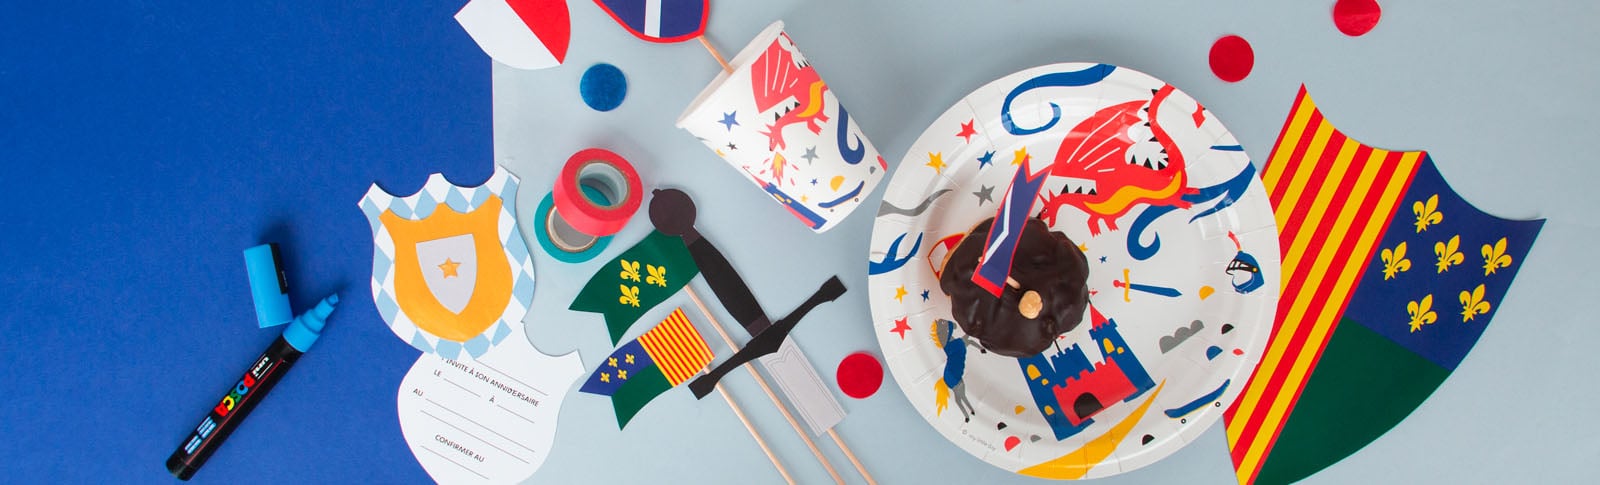 Animation ideas for a knight-themed child's birthday party